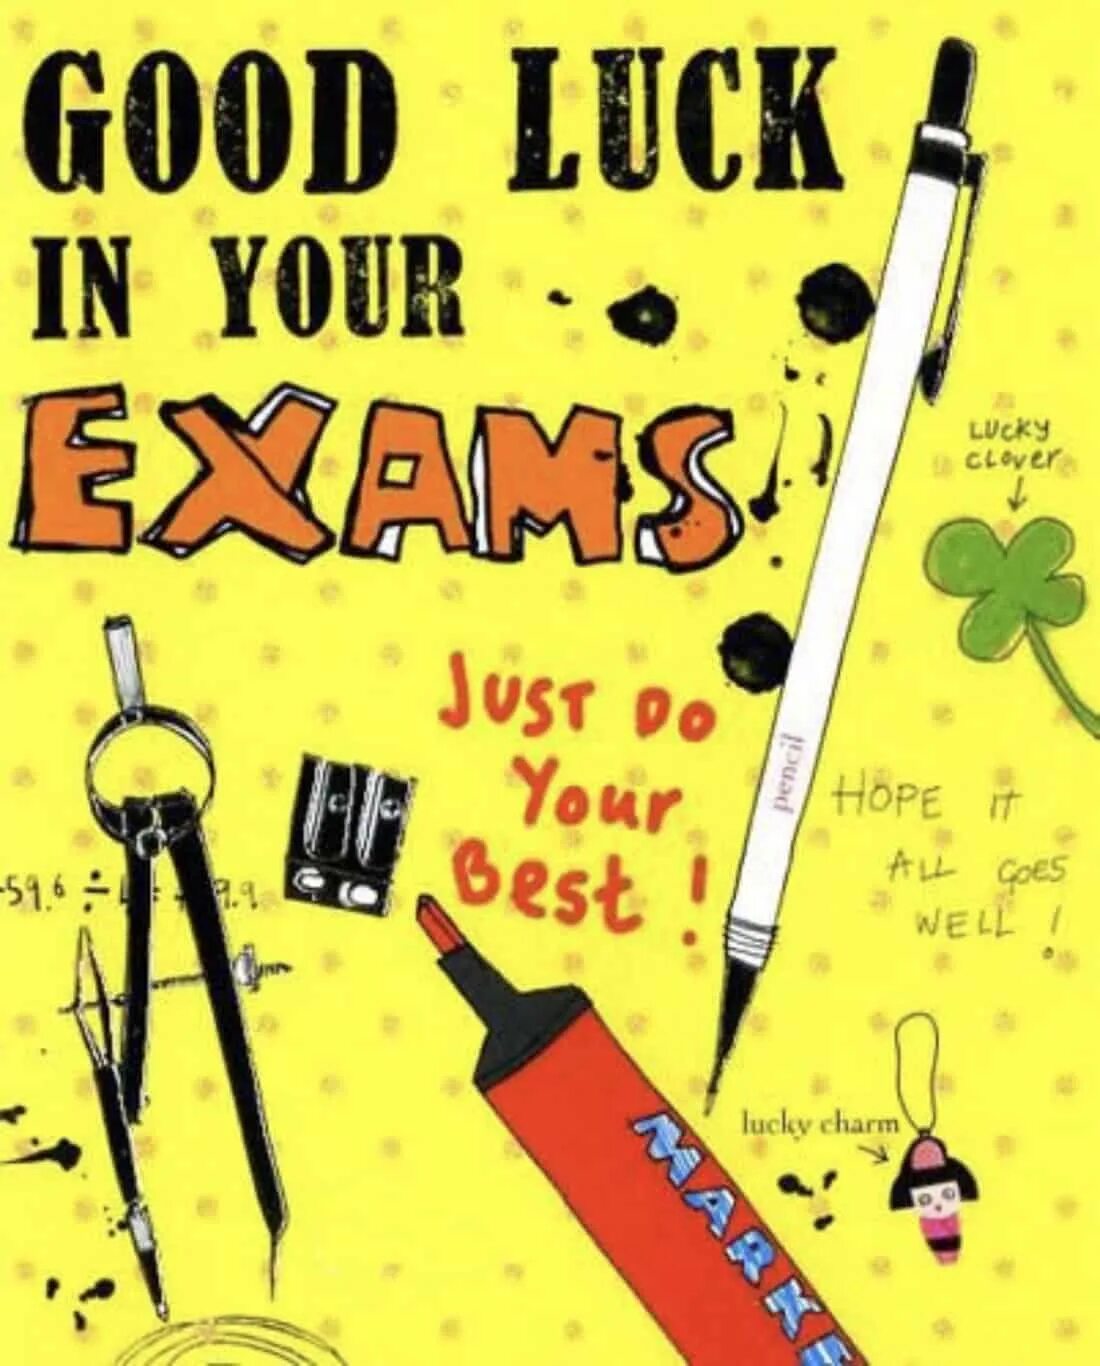 You well in your exam. Good luck in your Exams. Good luck at your Exam. Good luck for Exams. Good luck for your Exam.